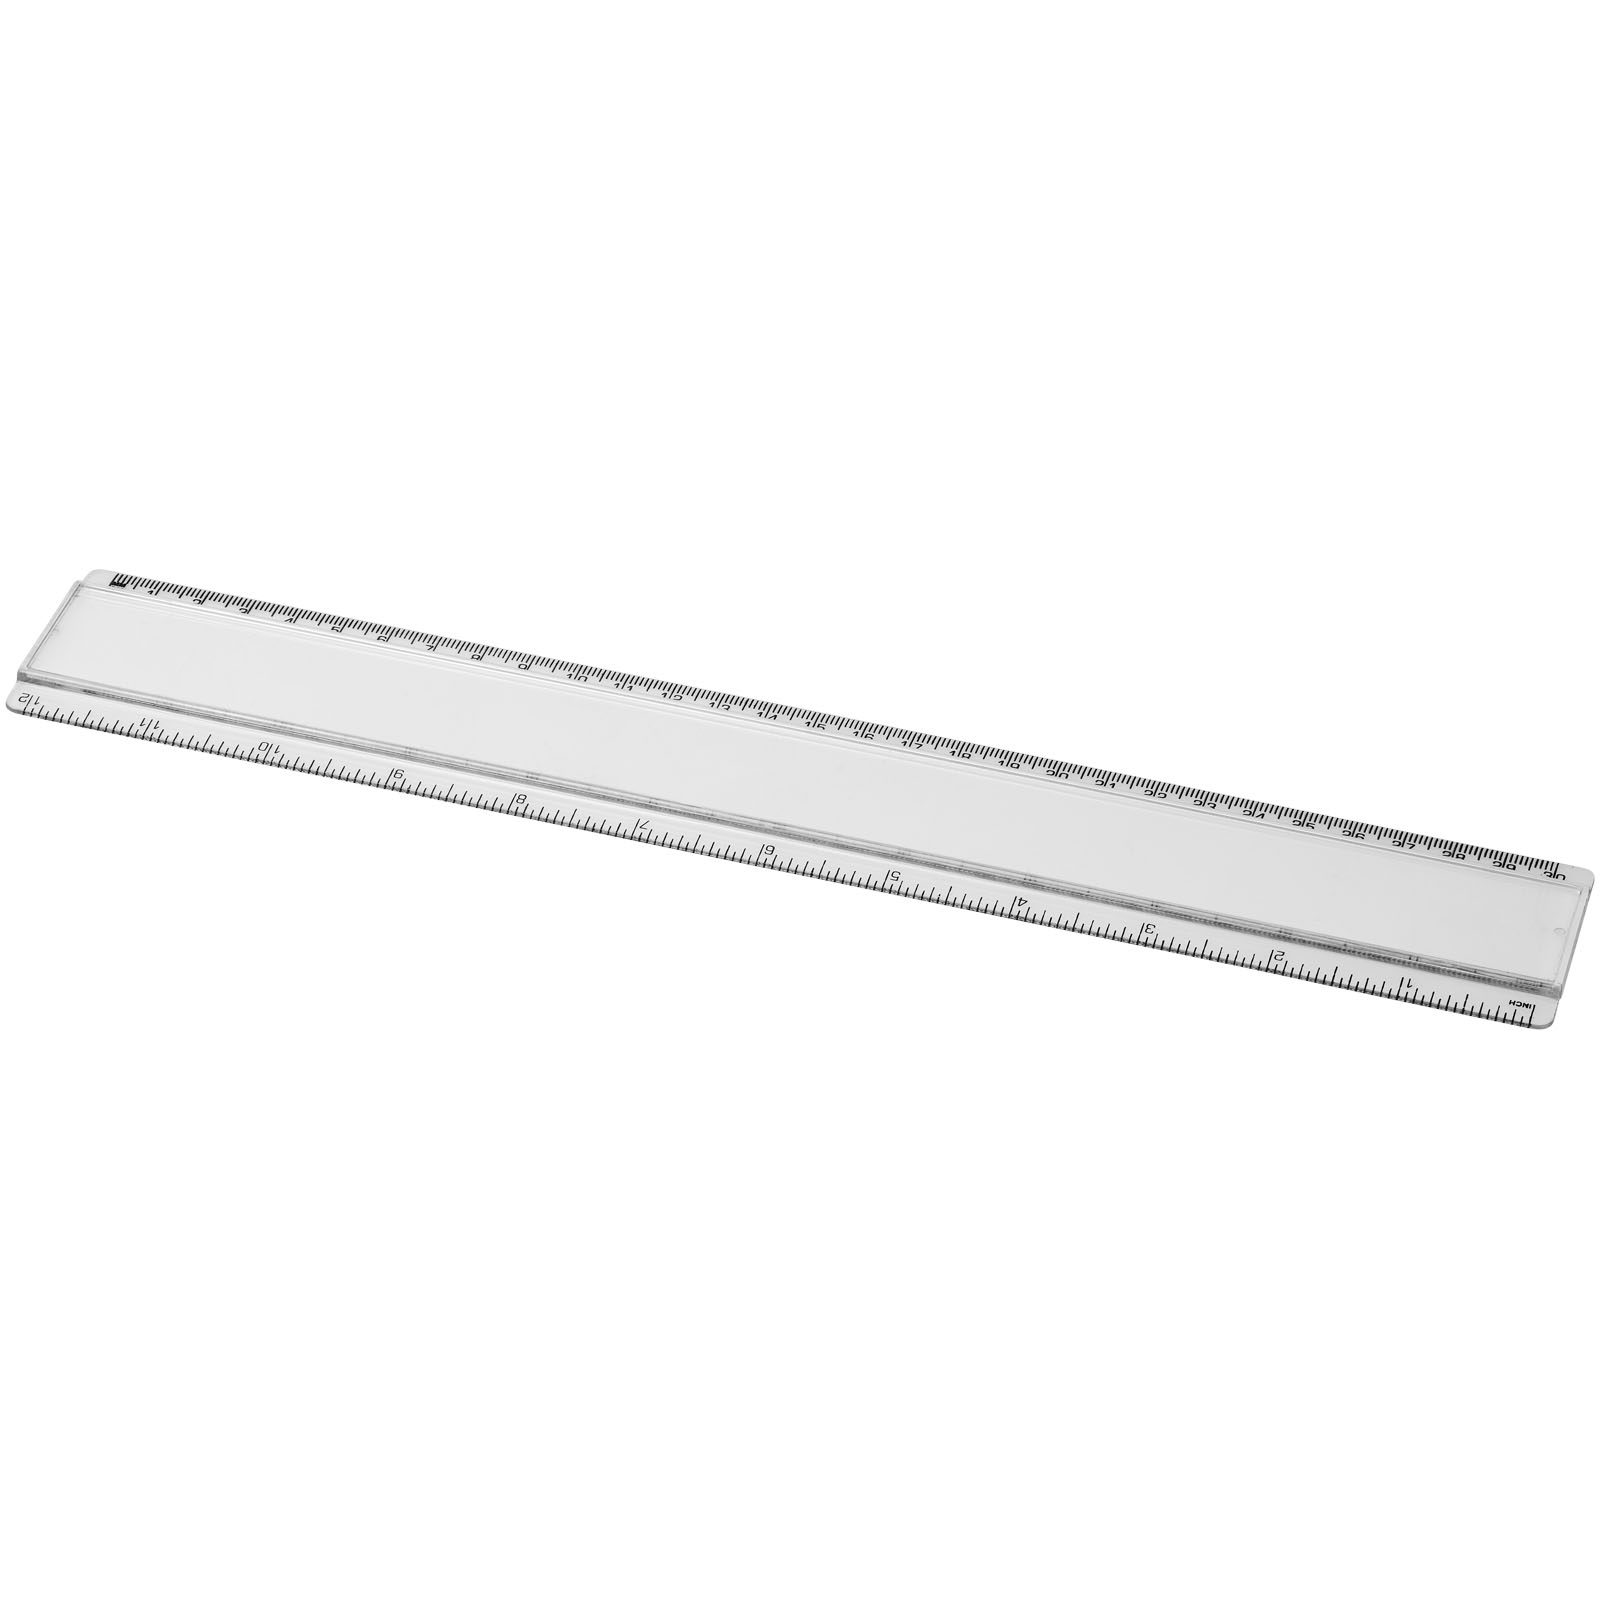 Plastic ruler with double marking and paper insert - Dalwood - Burton upon Trent